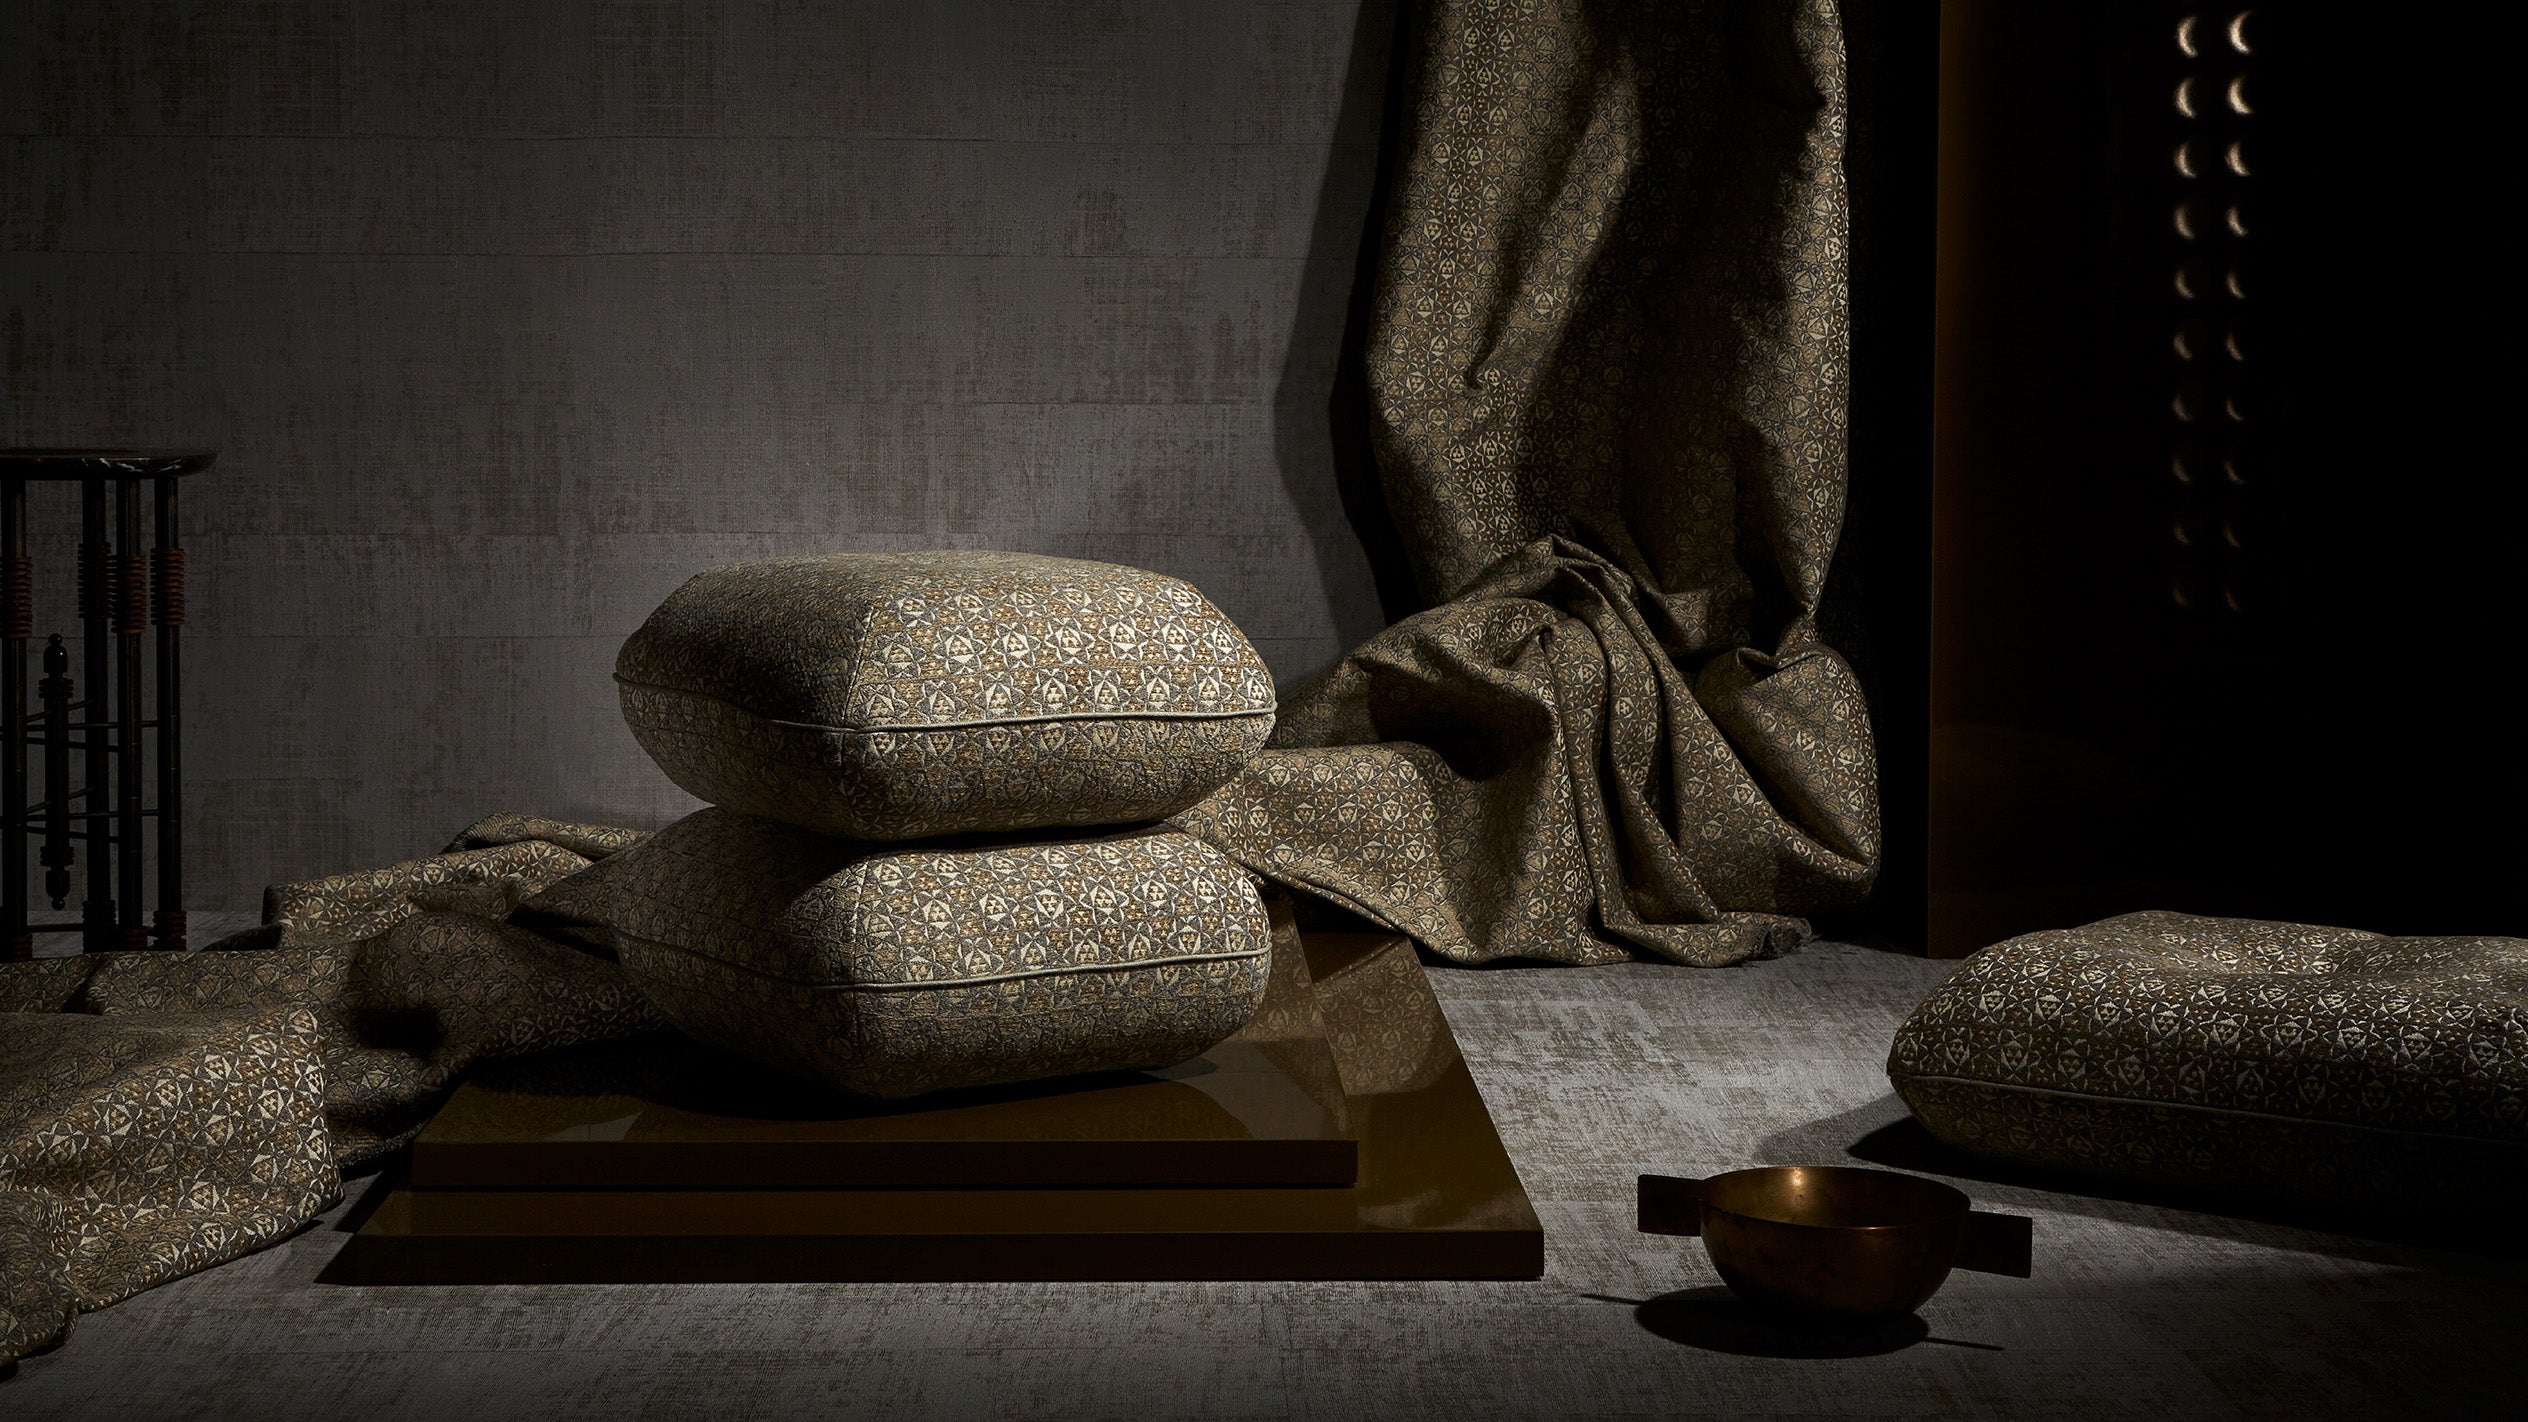 An assortment of upholstered cushions, decorative objects and drapery. 